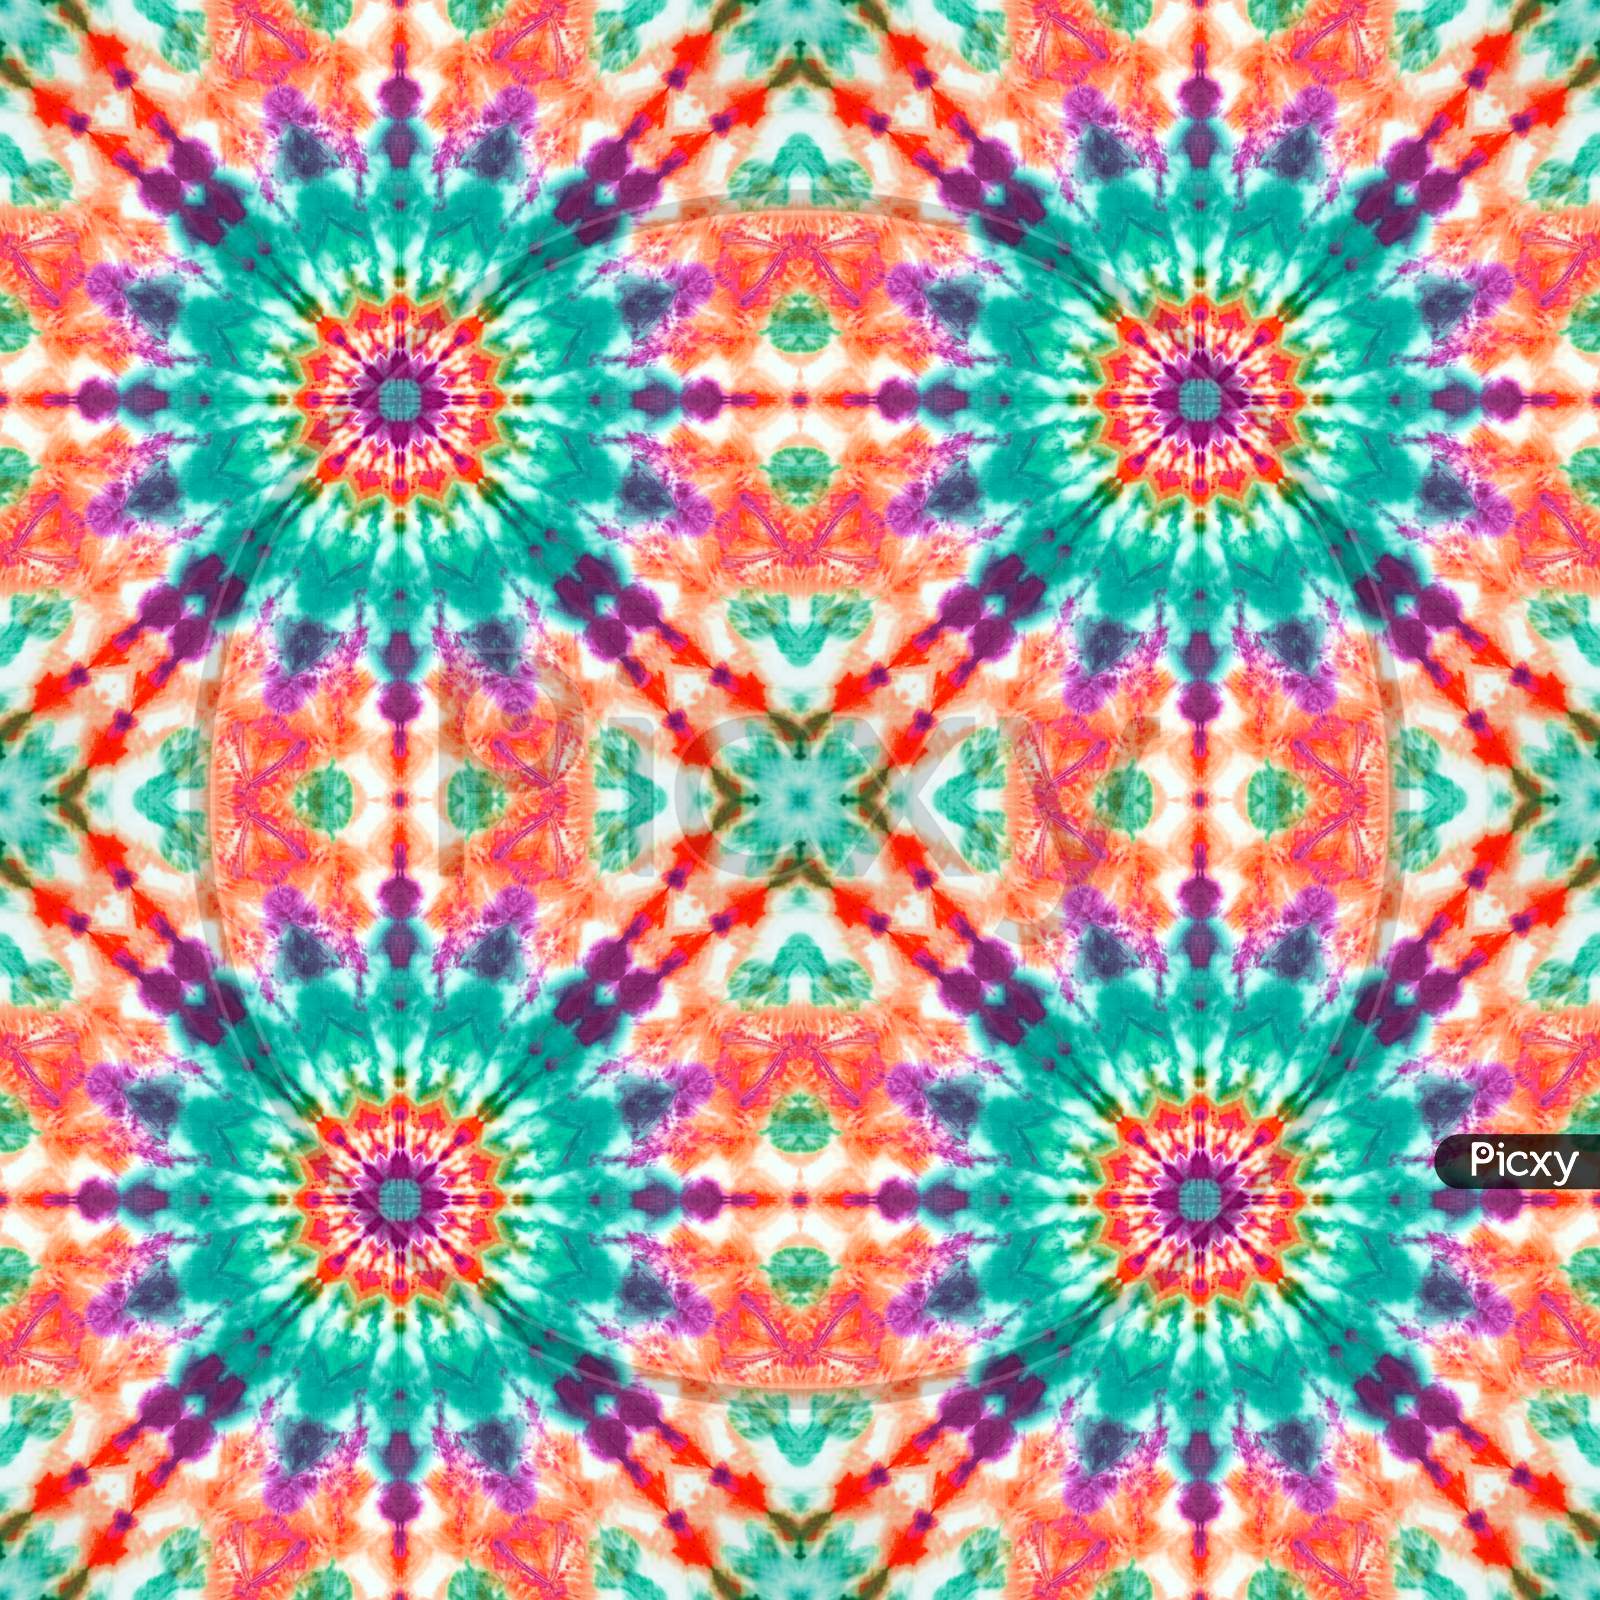 Image of Seamless Abstract Tie-Dye Pattern-TM144155-Picxy